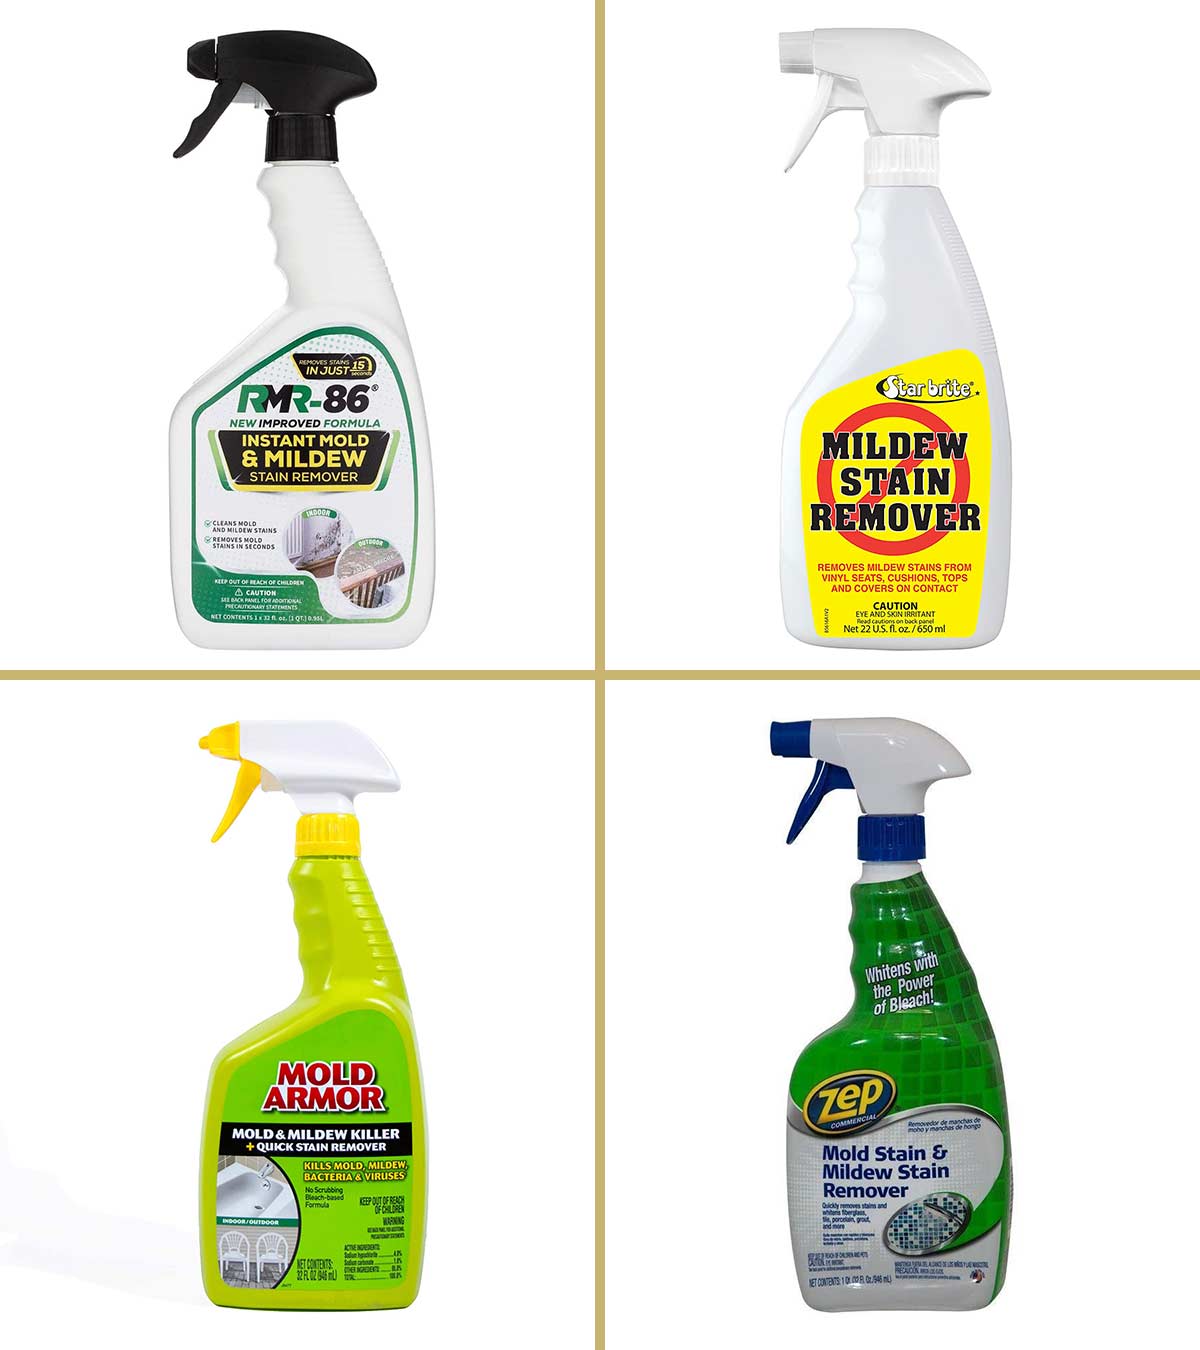 Chemical Specialty Product Testing for Household Cleaning Products